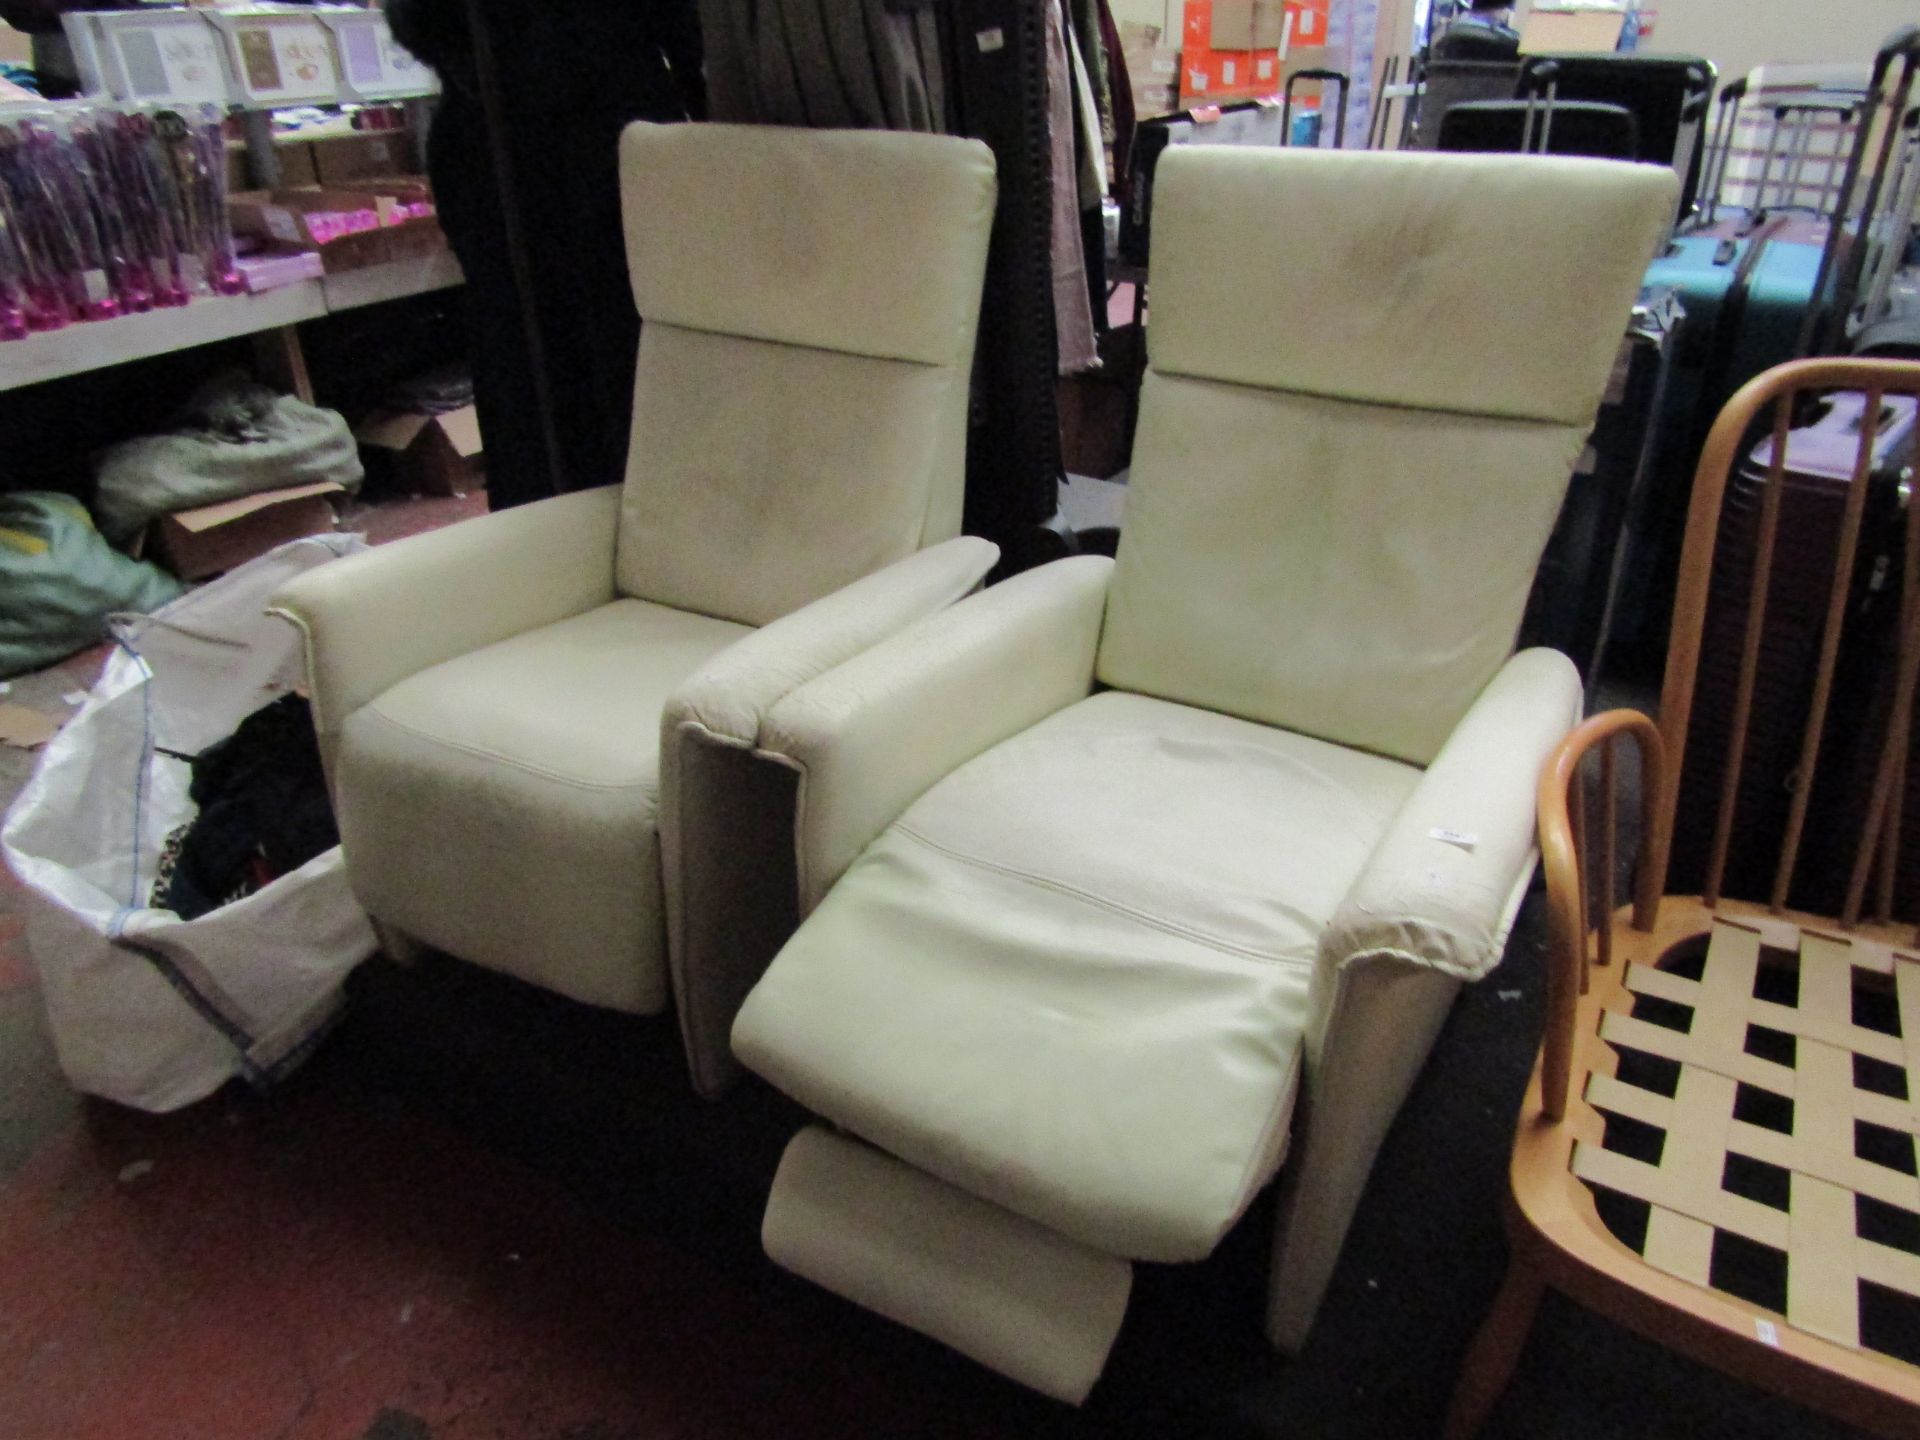 2 x Cream Leather Reclining Chairs. Not the best condition but still usable